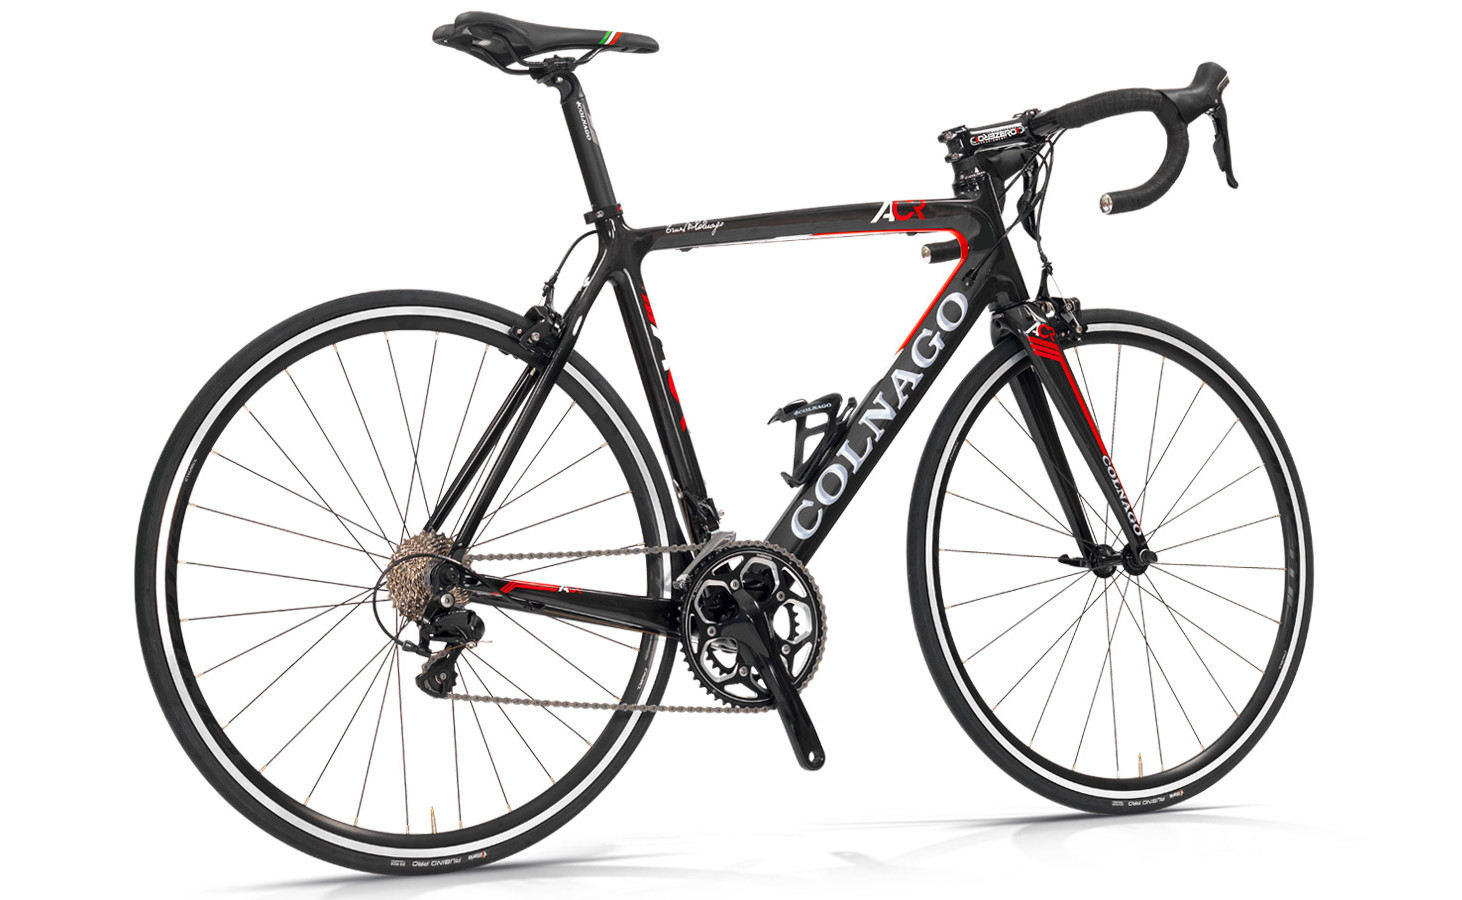 Colnago ACR Shimano Ultegra bike for guided road bike tours and rentals in Victoria BC Canada